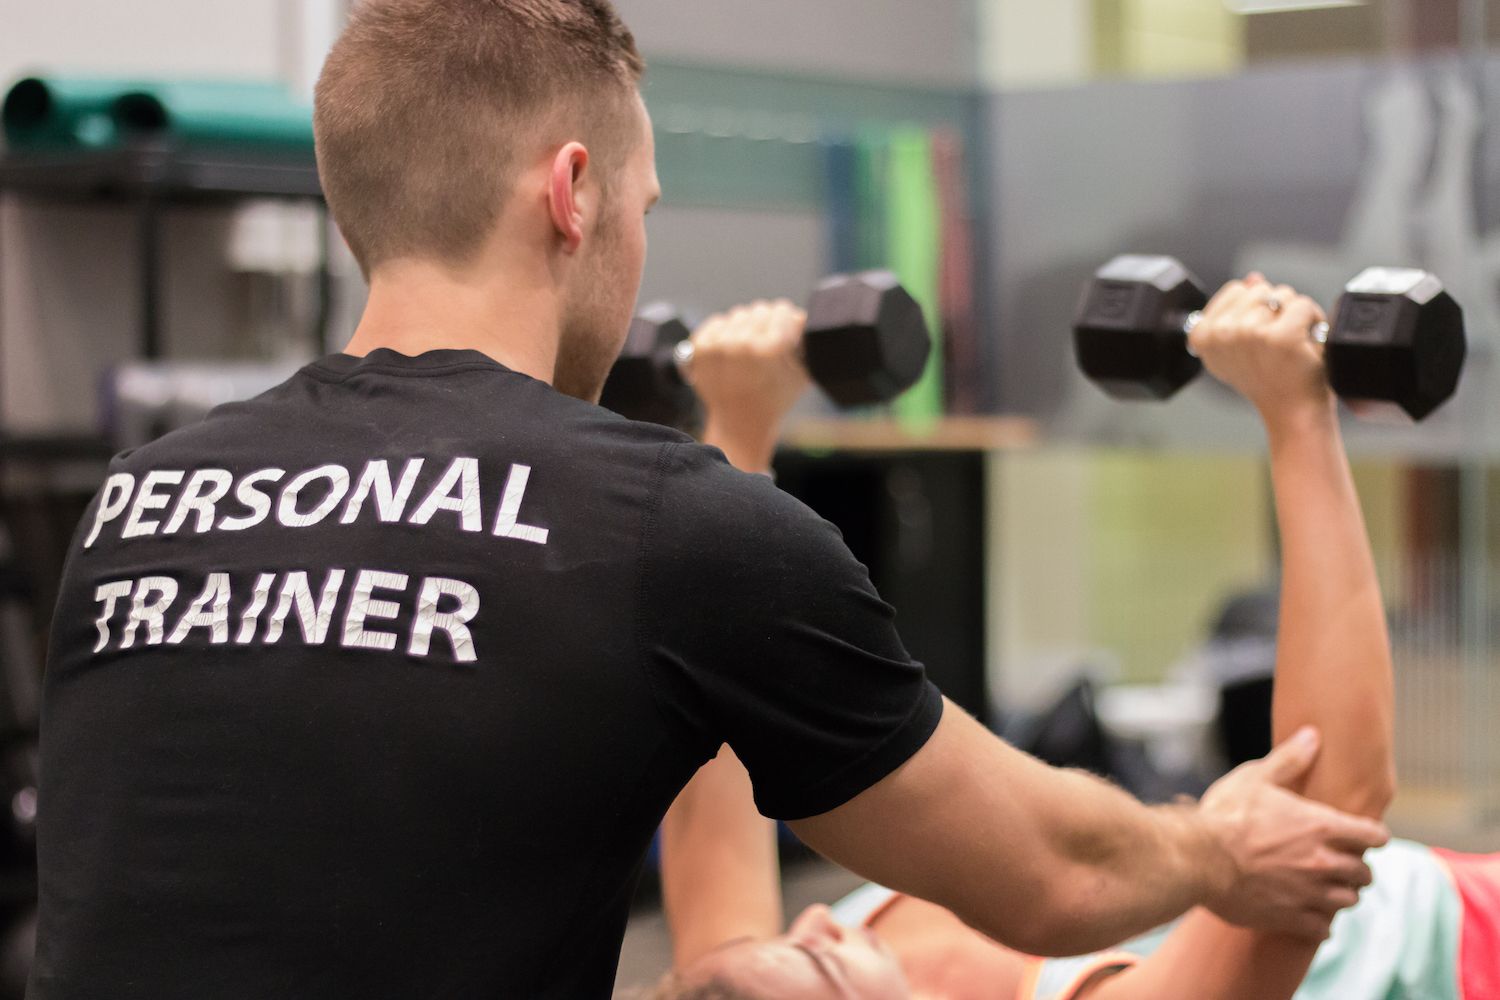 Private Personal Training - 3 weeks - 6 Sessions ($70)